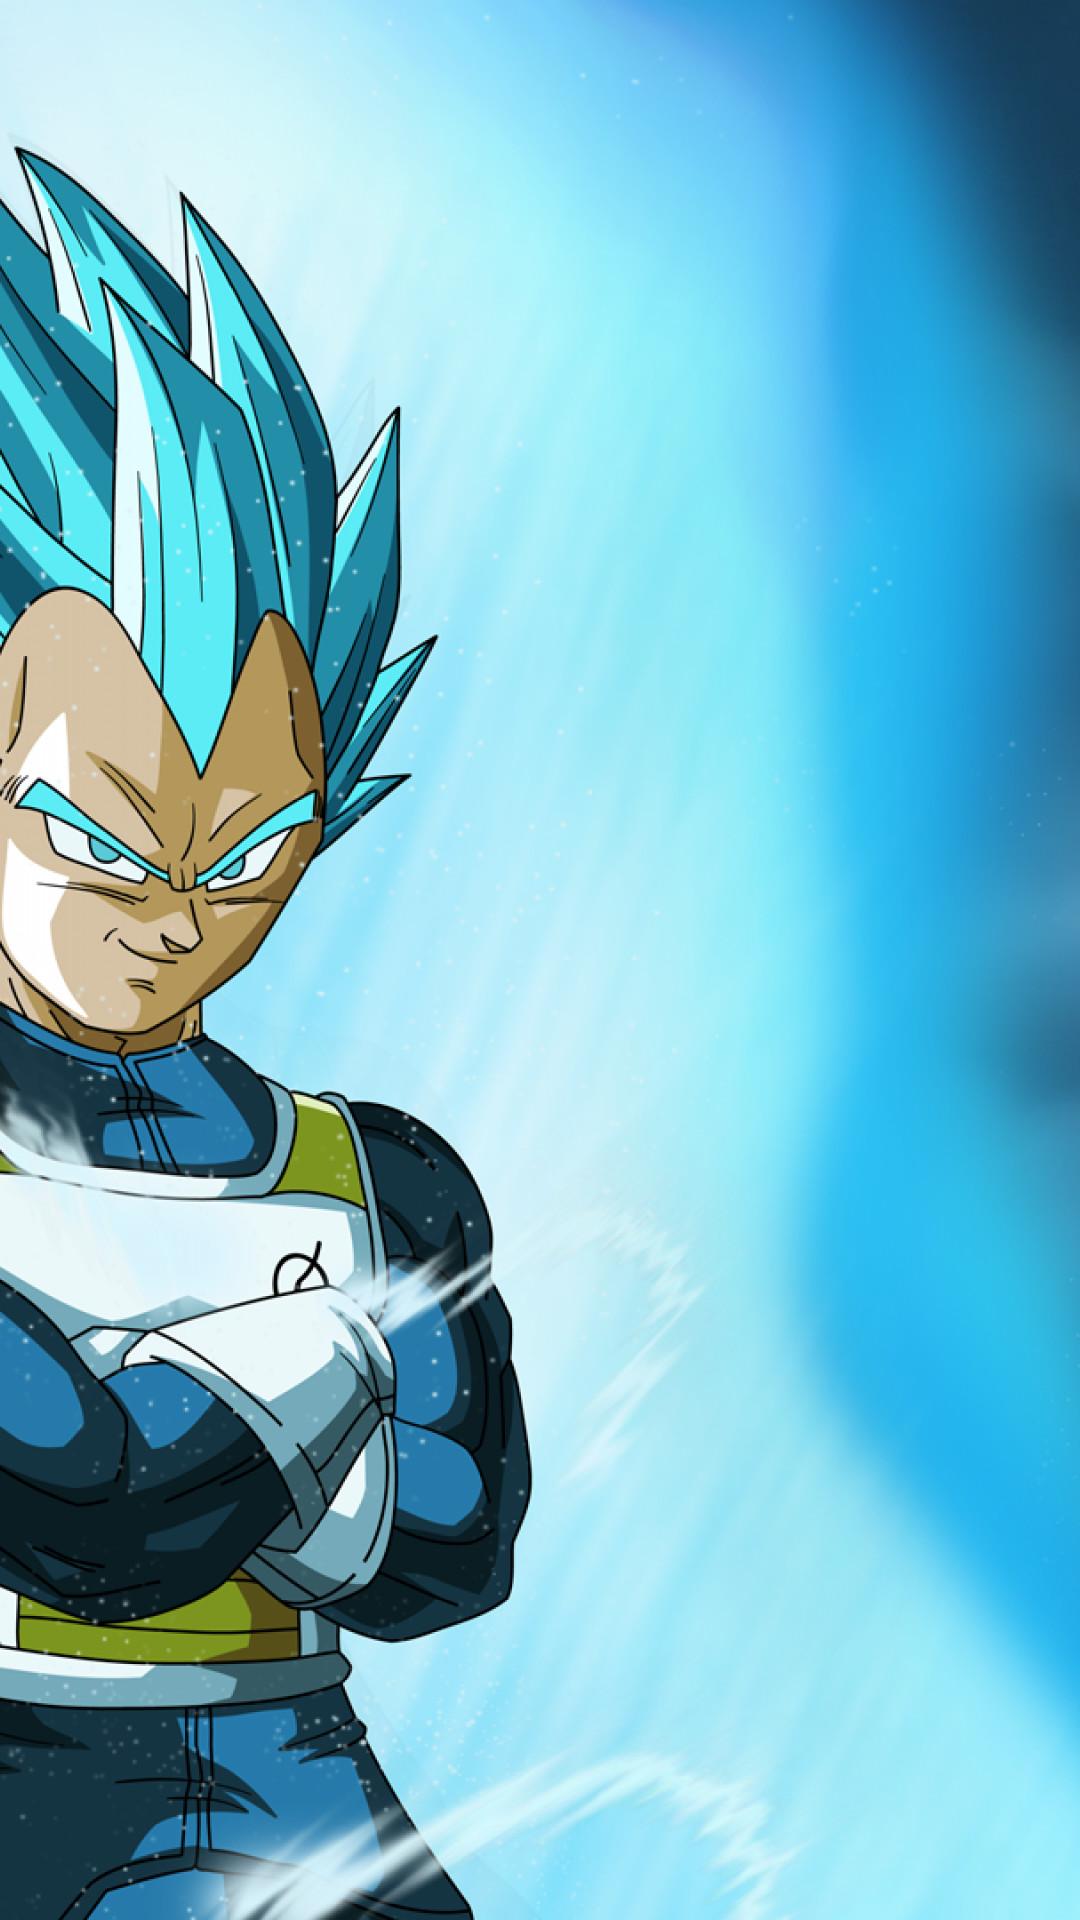 National Day Of Reconciliation ⁓ The Fastest Vegeta Ssj Blue